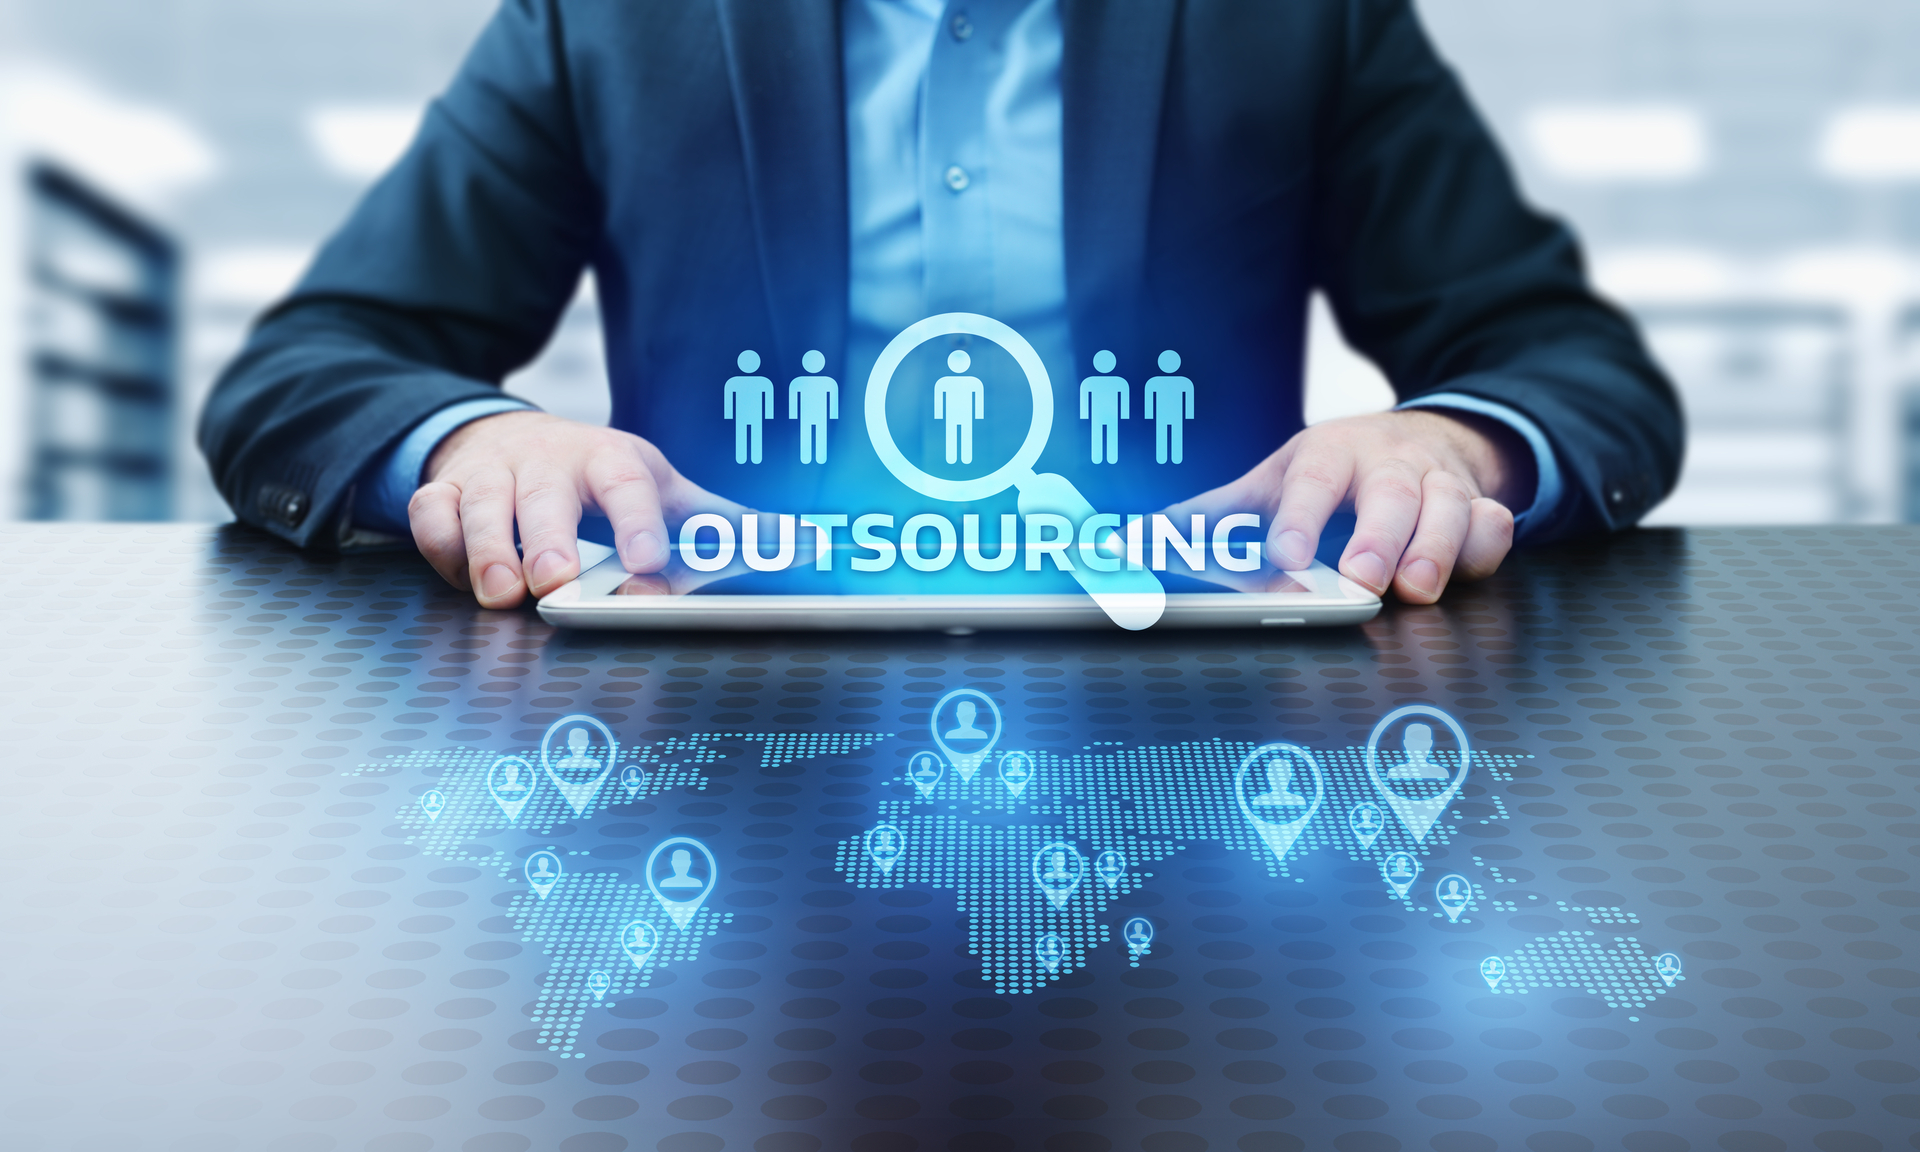 IT outsourcing: More quality and time for your company